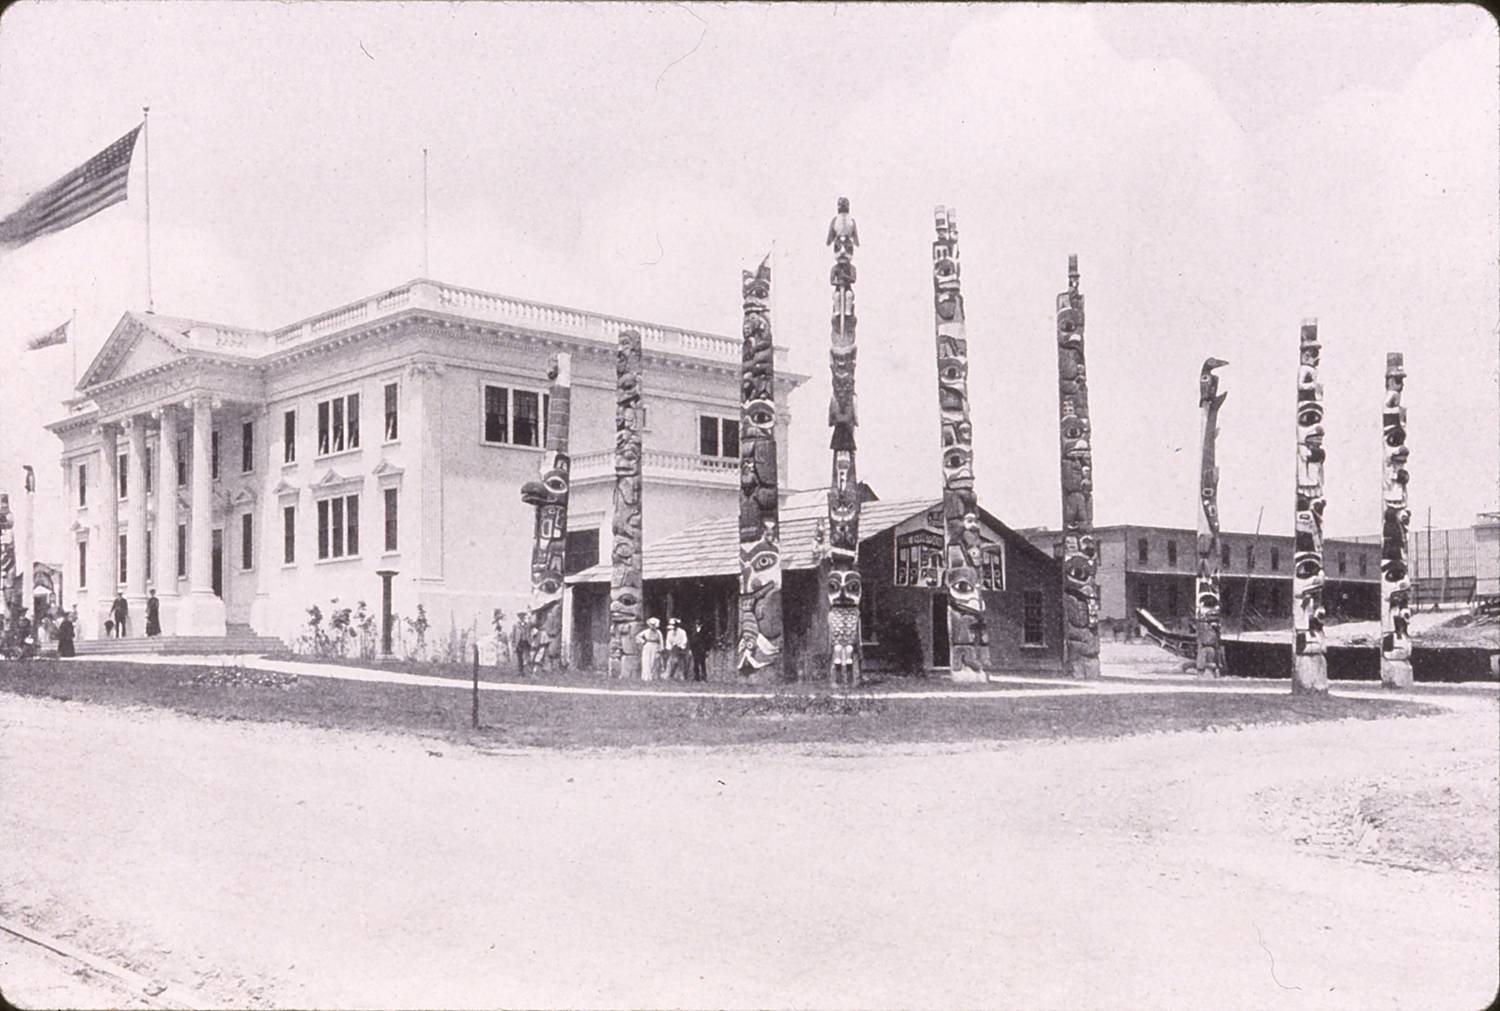 Totem poles on display during a World's Fair in 1904